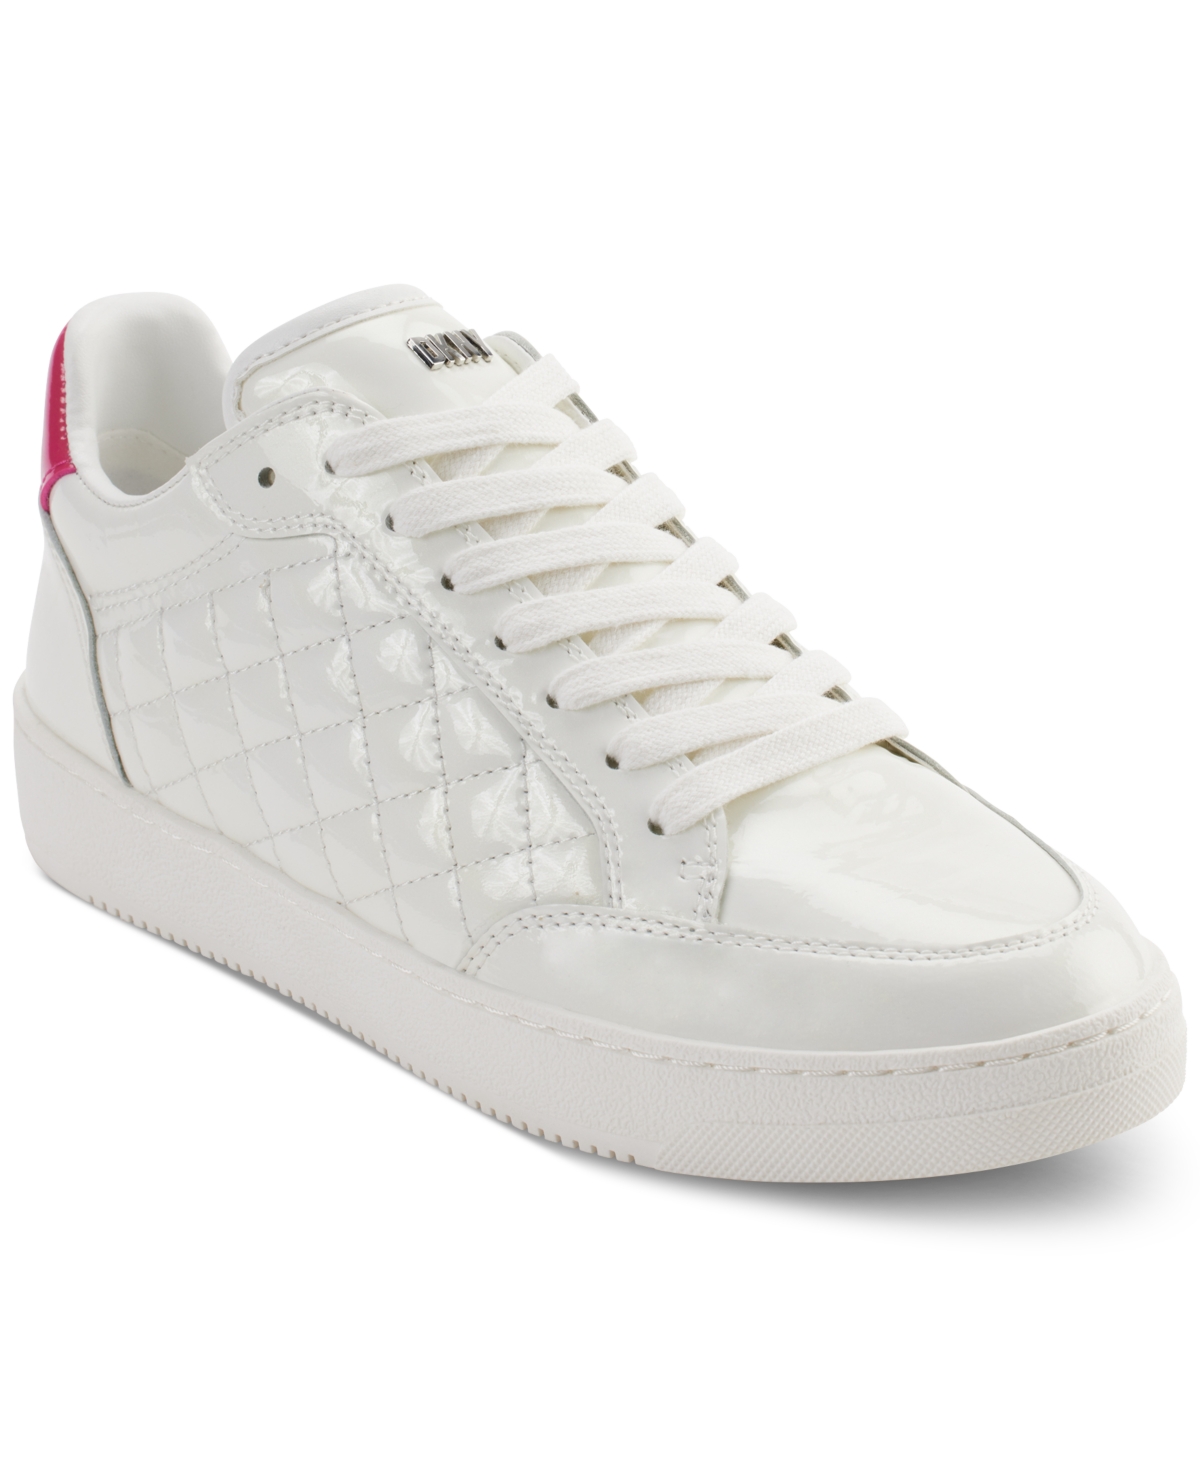 Women's Oriel Quilted Lace-Up Low-Top Sneakers - Silver